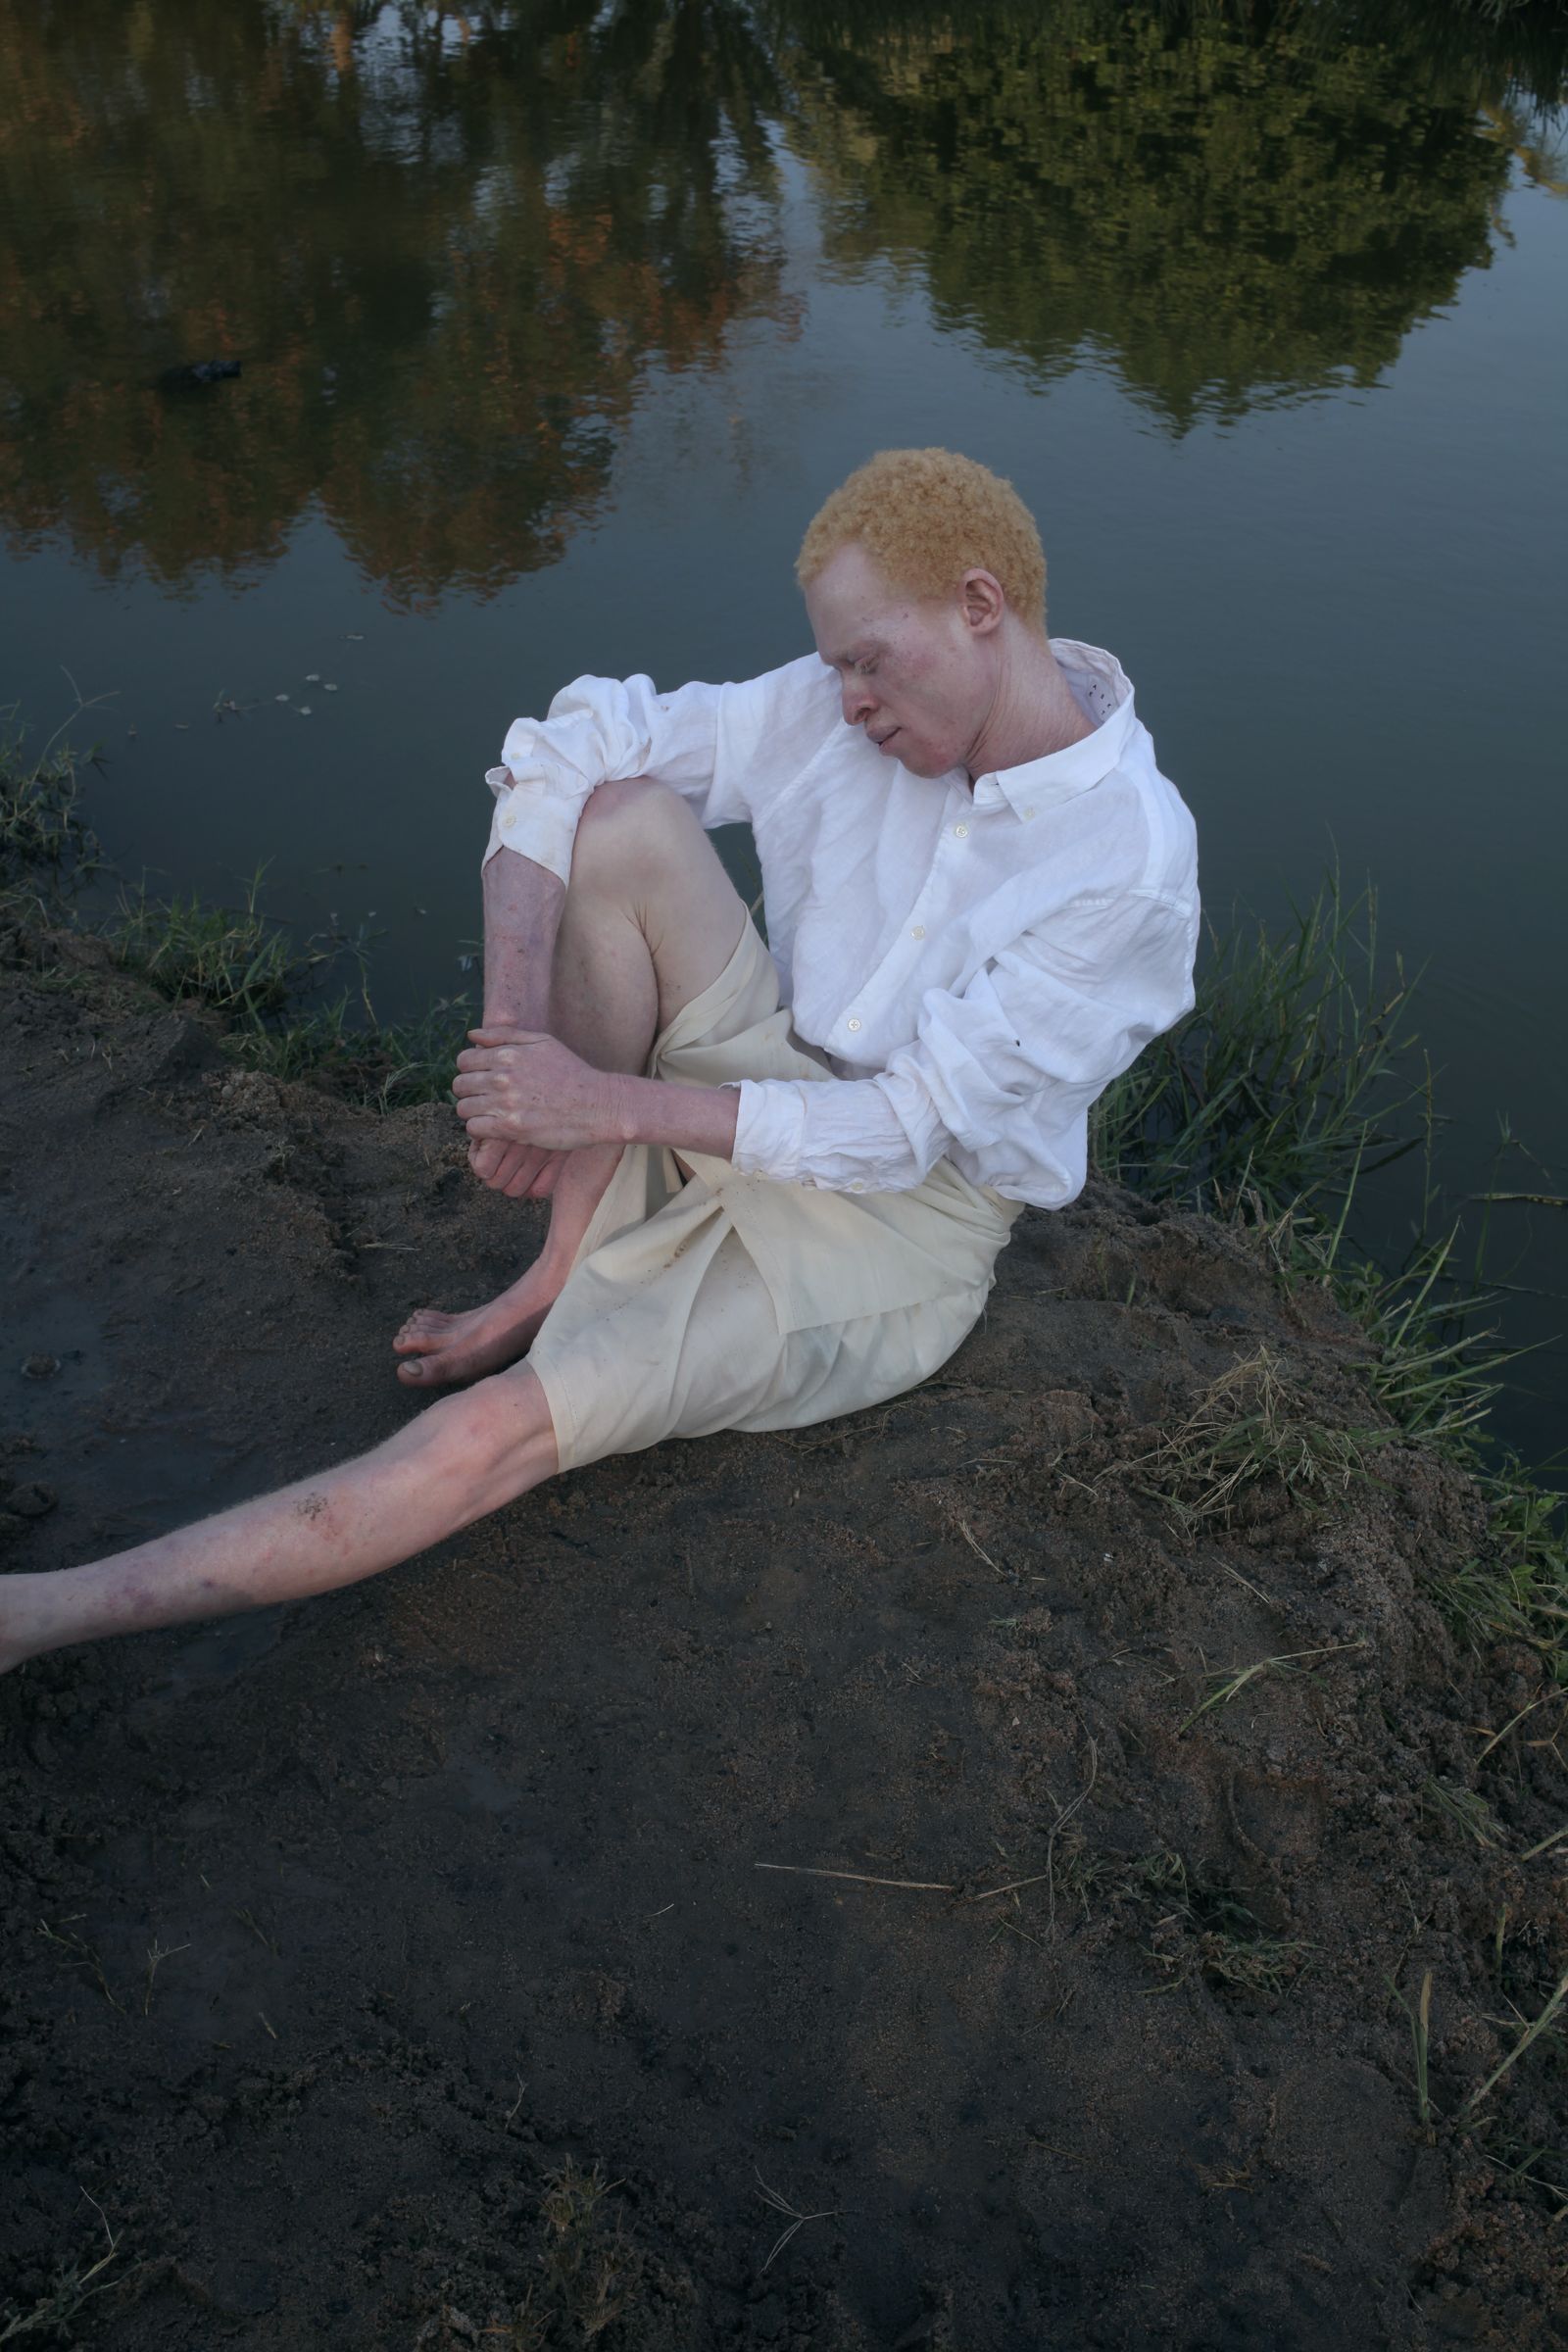 © Denisse Ariana Pérez - Image from the "Albinism, Albinism" Part I & II photography project